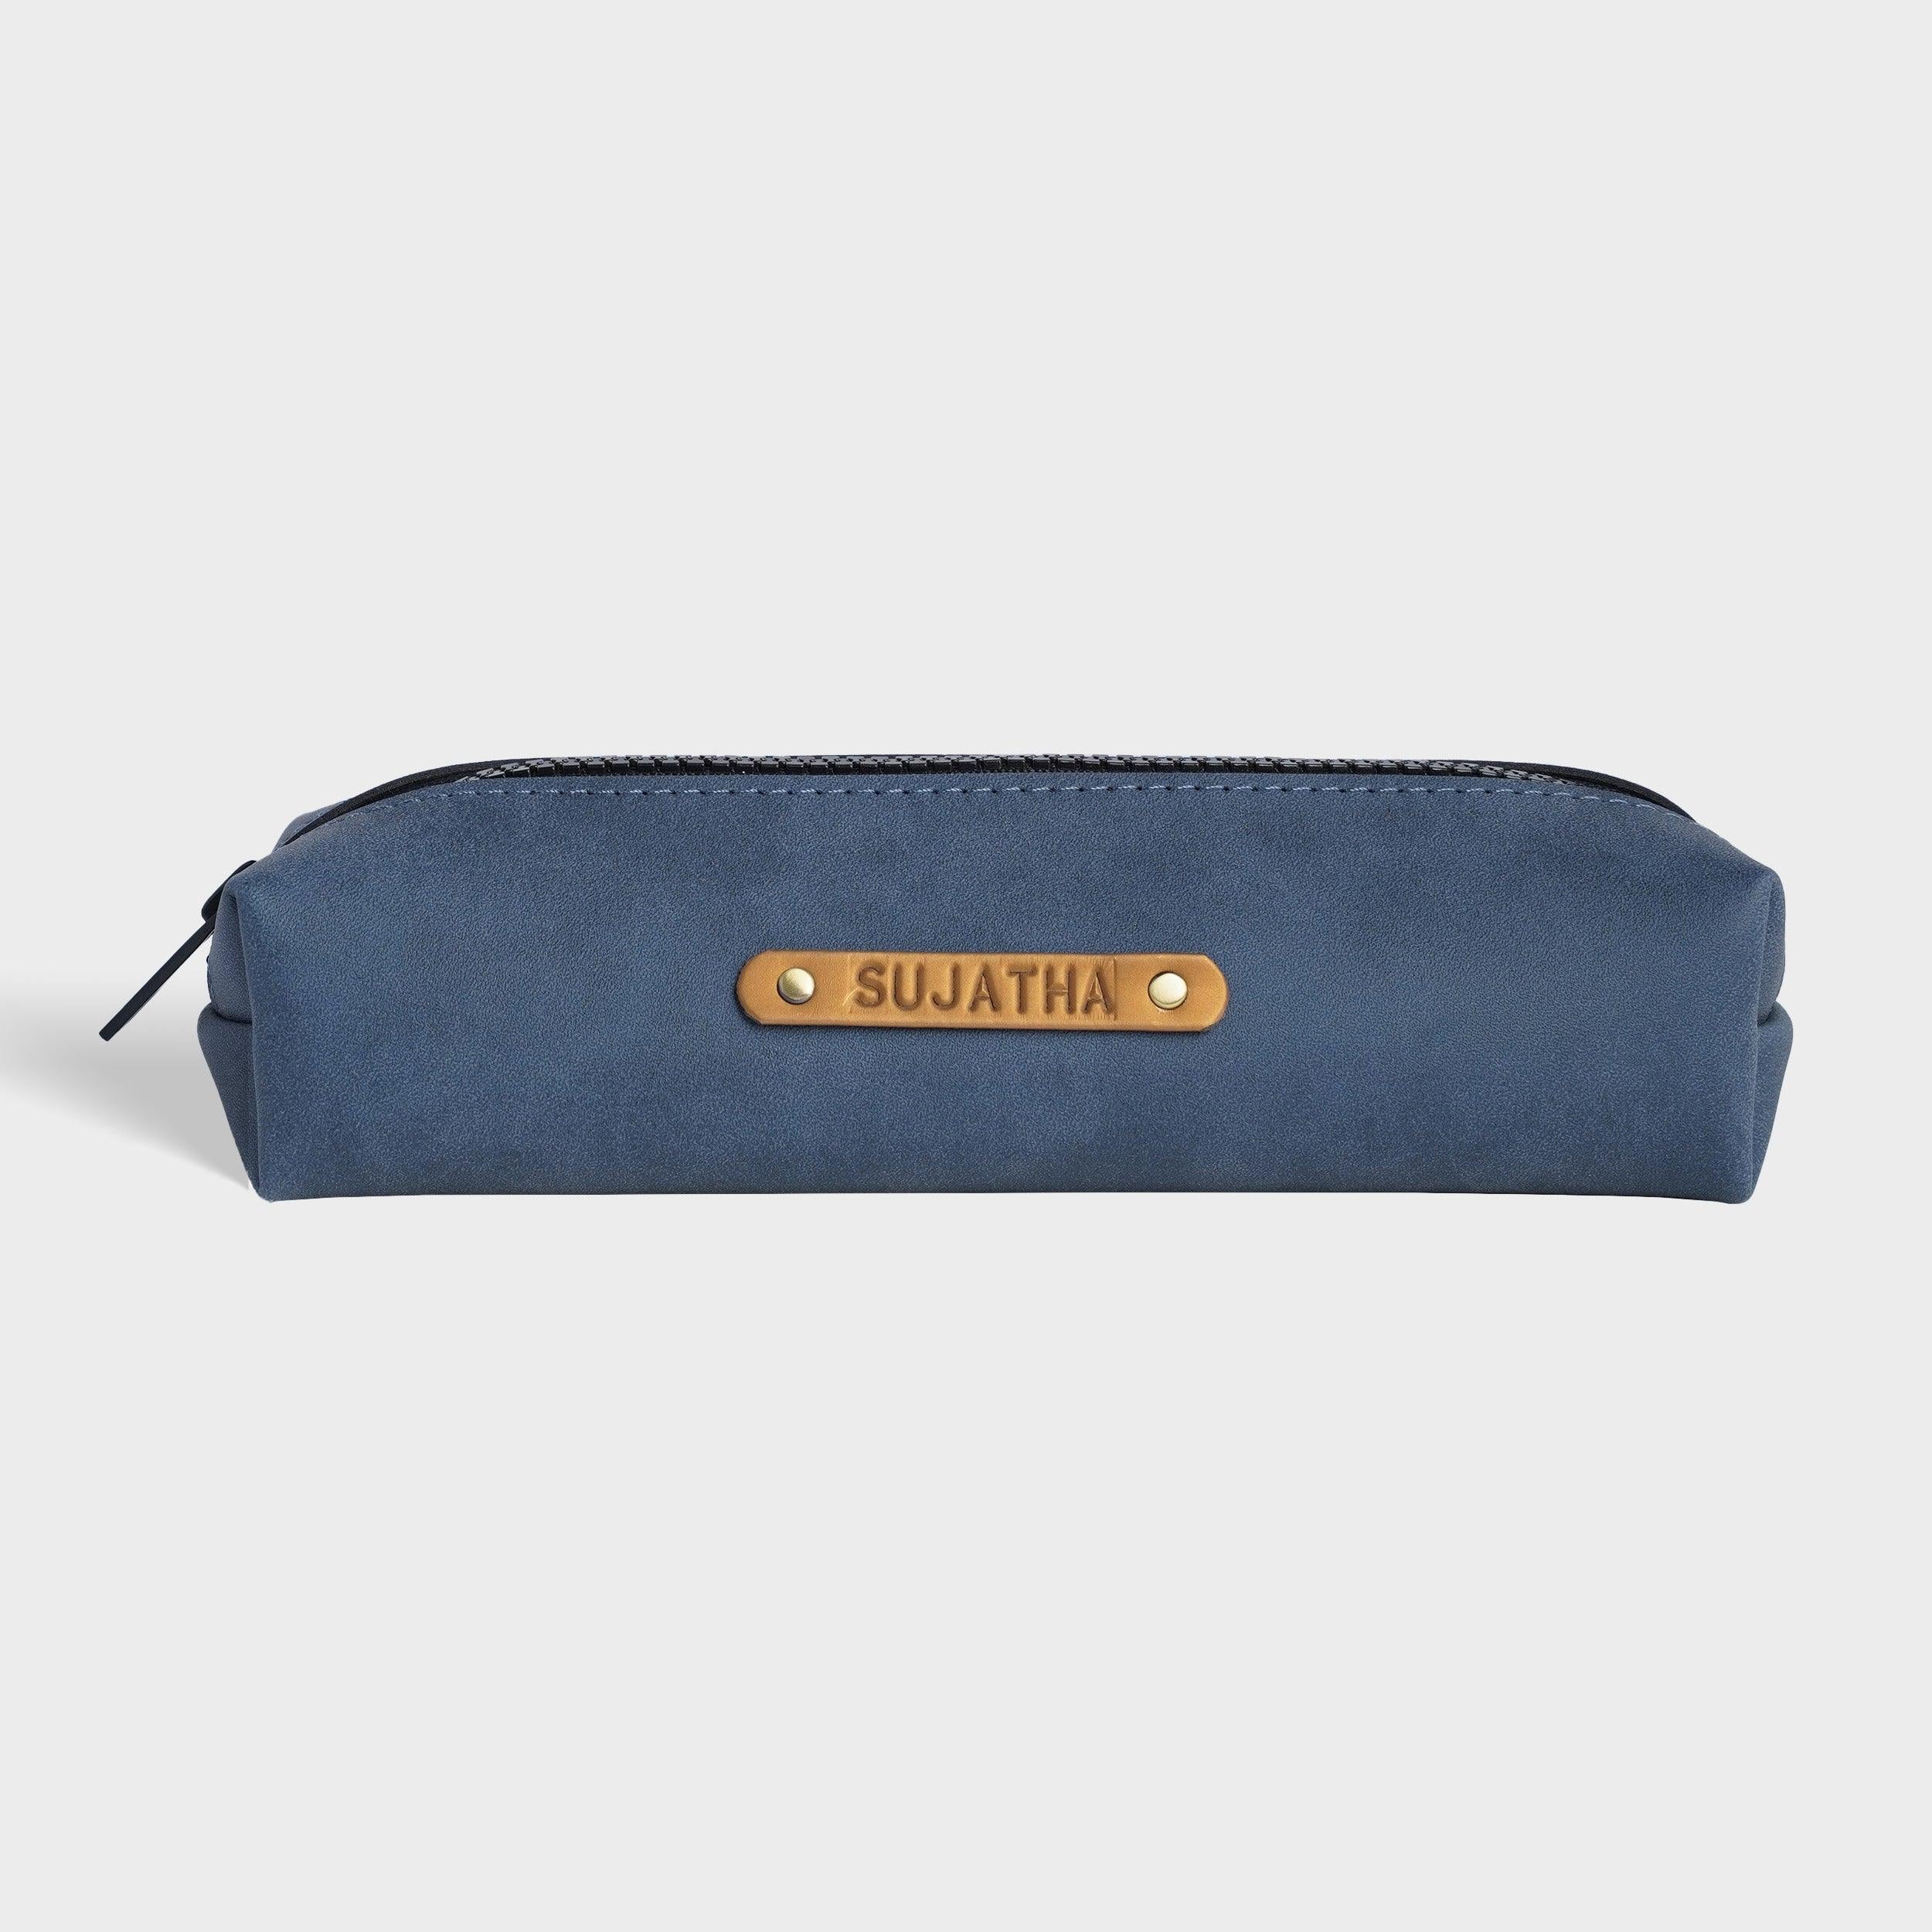 Personalised Pencil Pouch - Travelsleek